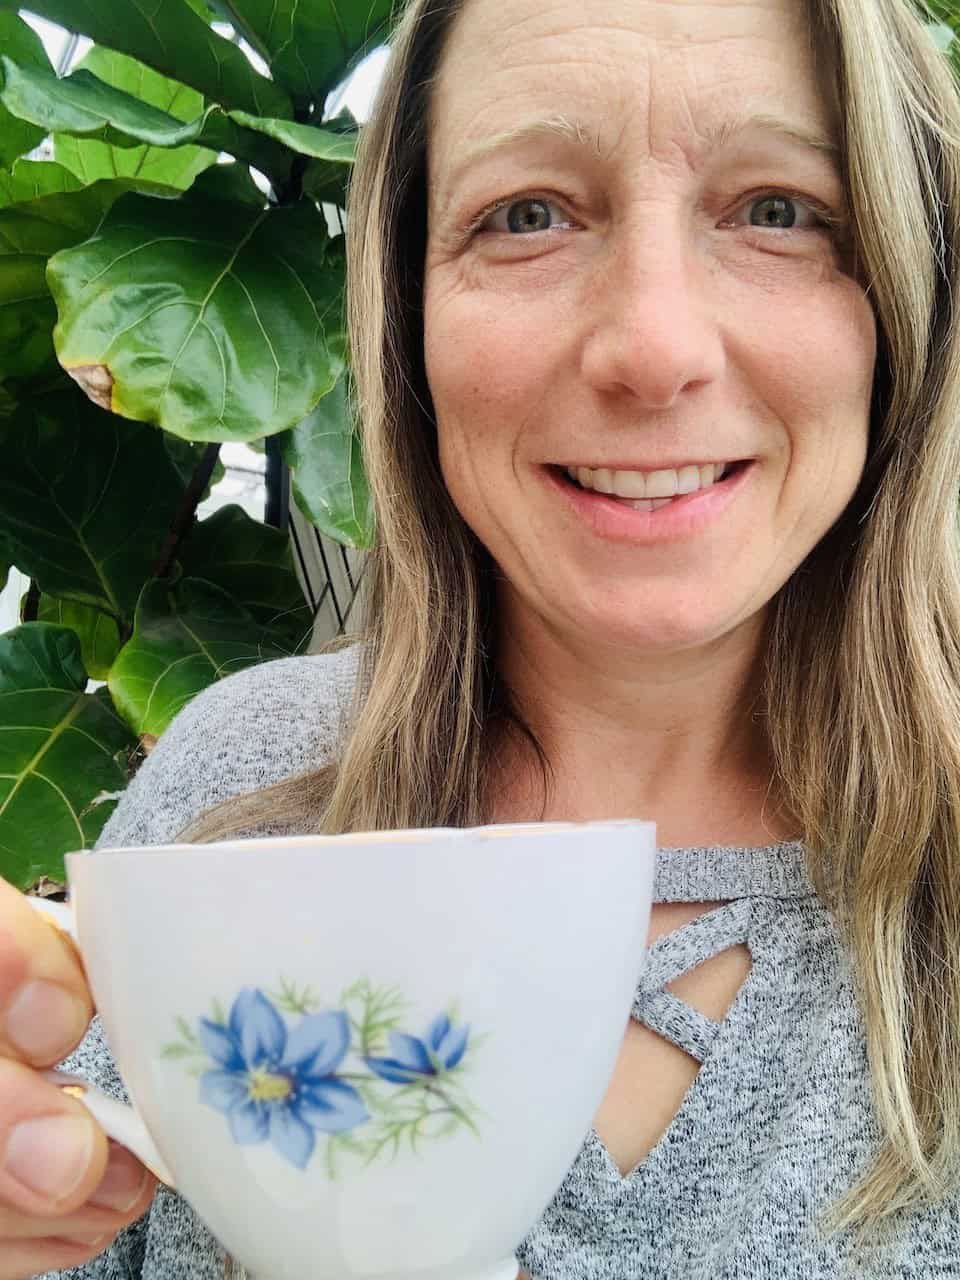 Enjoying Tea at the Watering Can Flower Market in Vineland Ontario Canada  - The Watering Can Flower Market boasts of celebrating the charm of mismatched fine bone teacups and saucers in Vineland, Ontario, Canada.